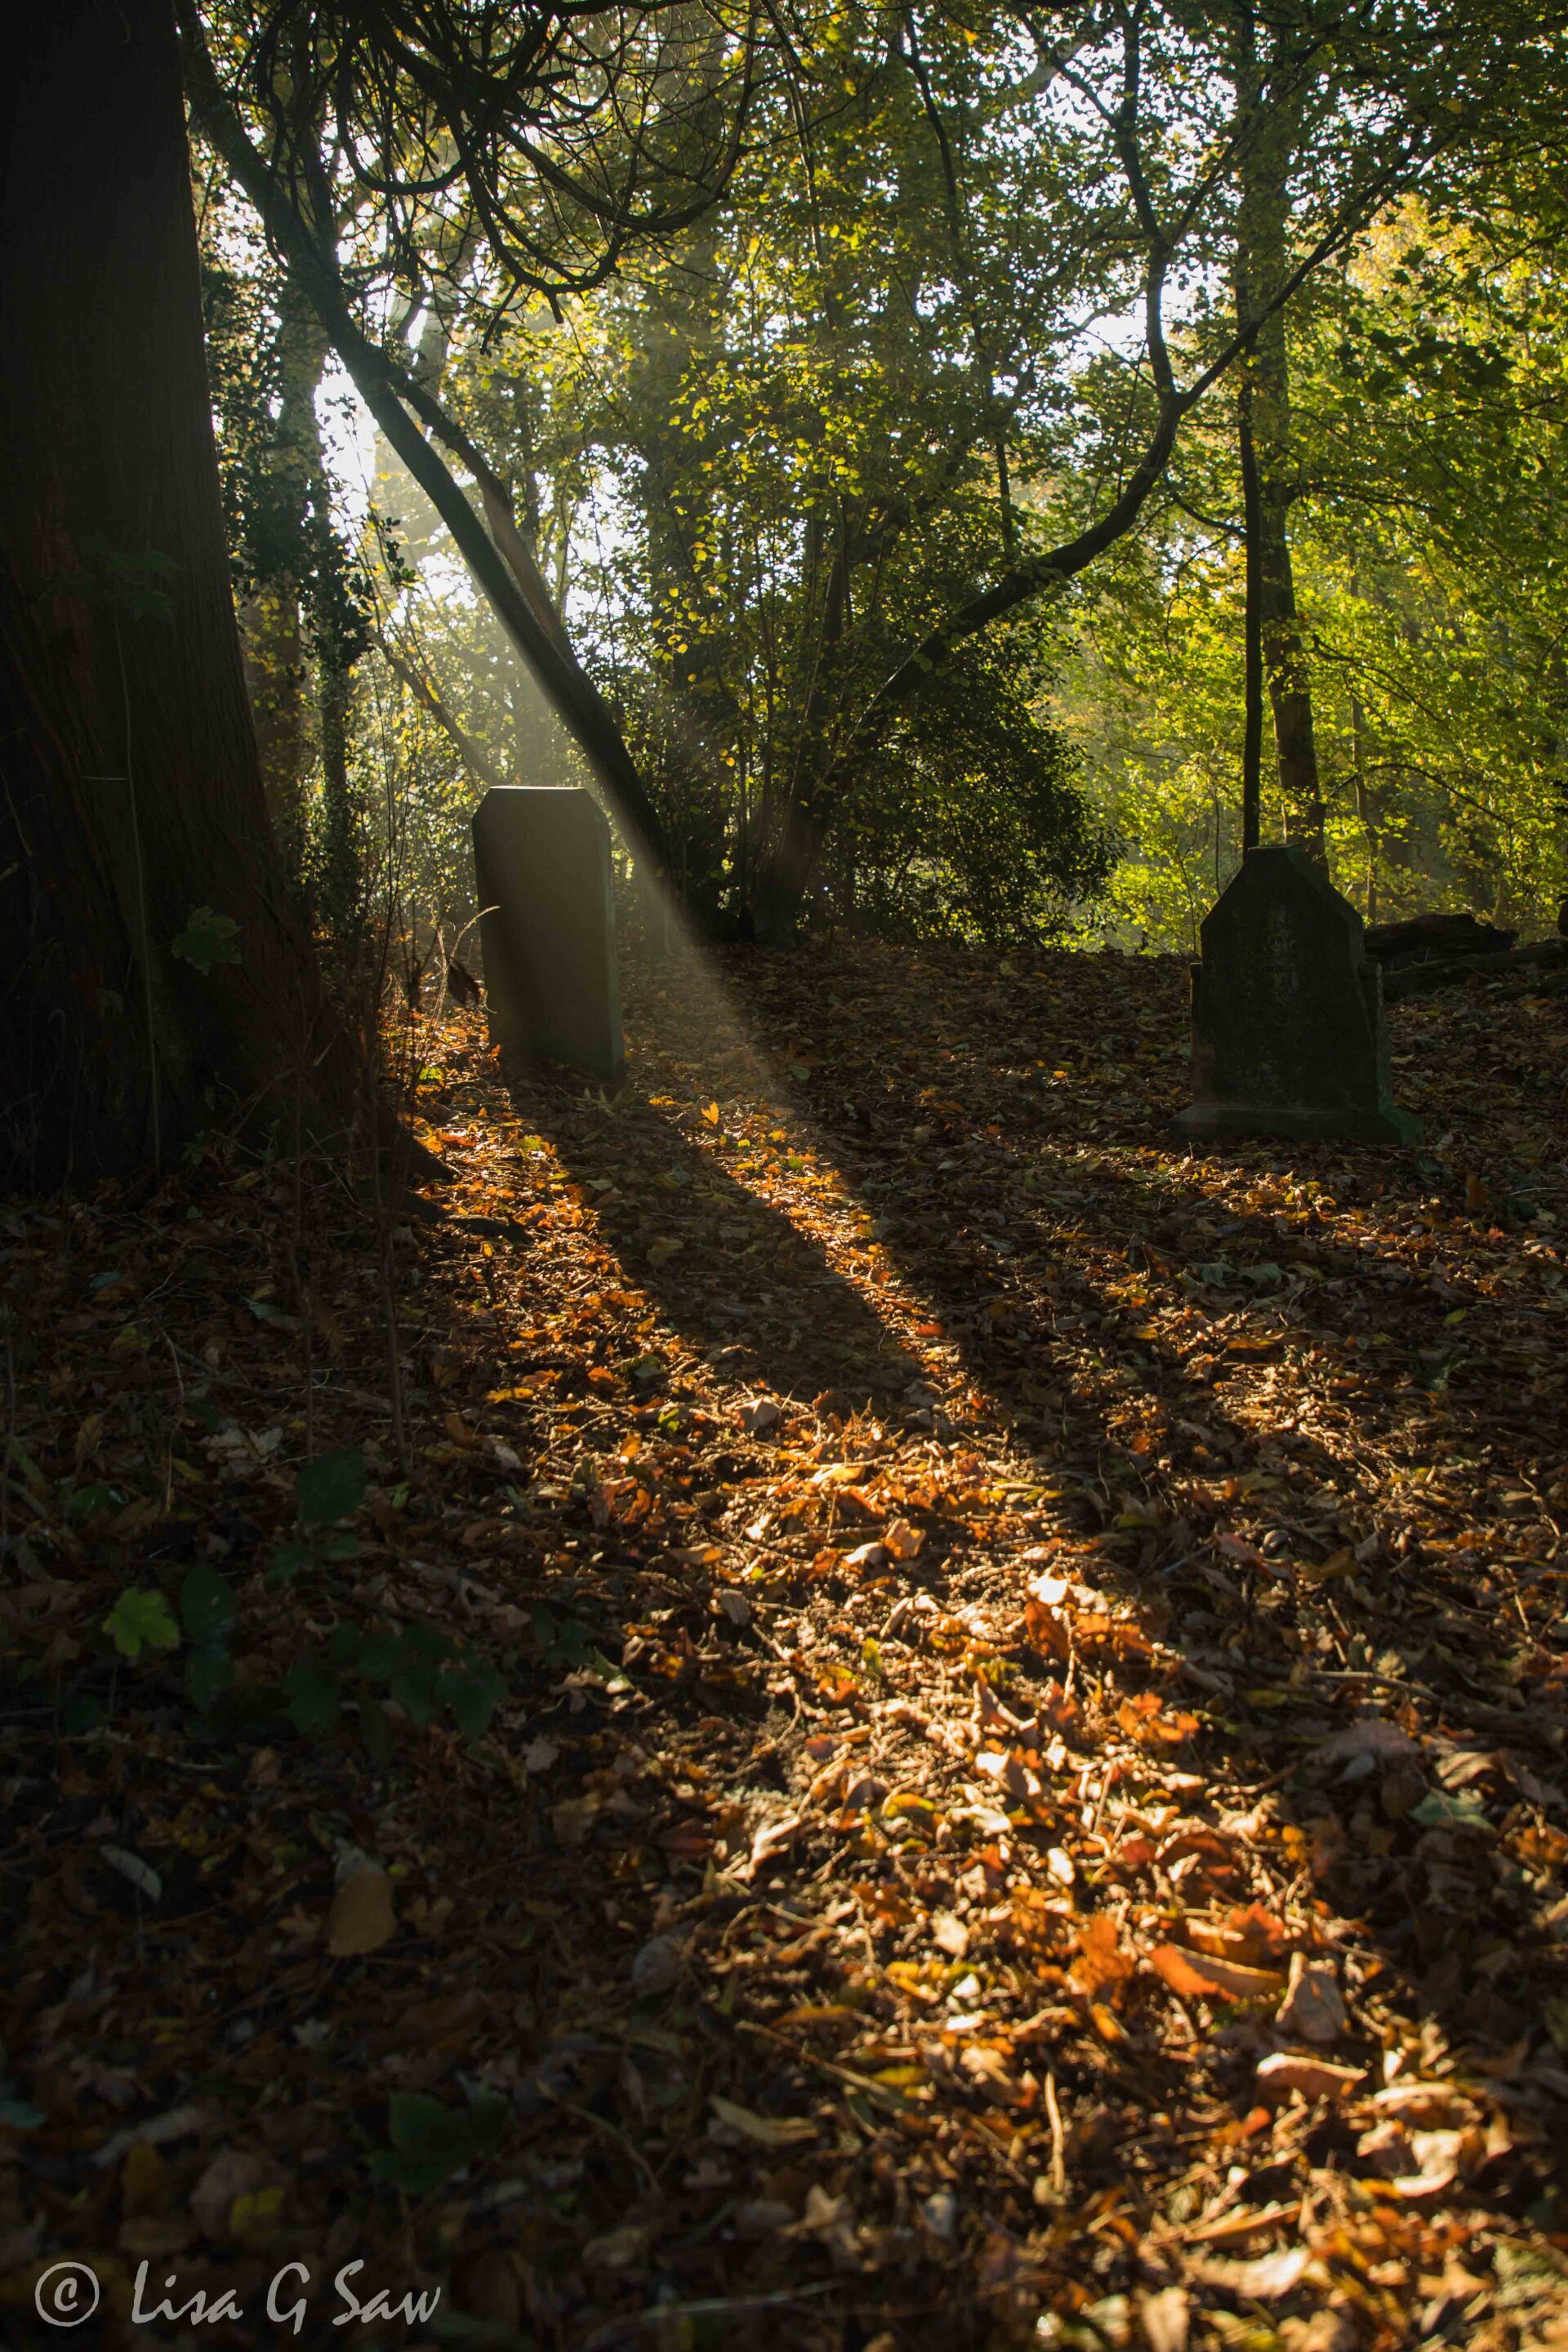 Gravestone silhouetted in late afternoon light in autumn